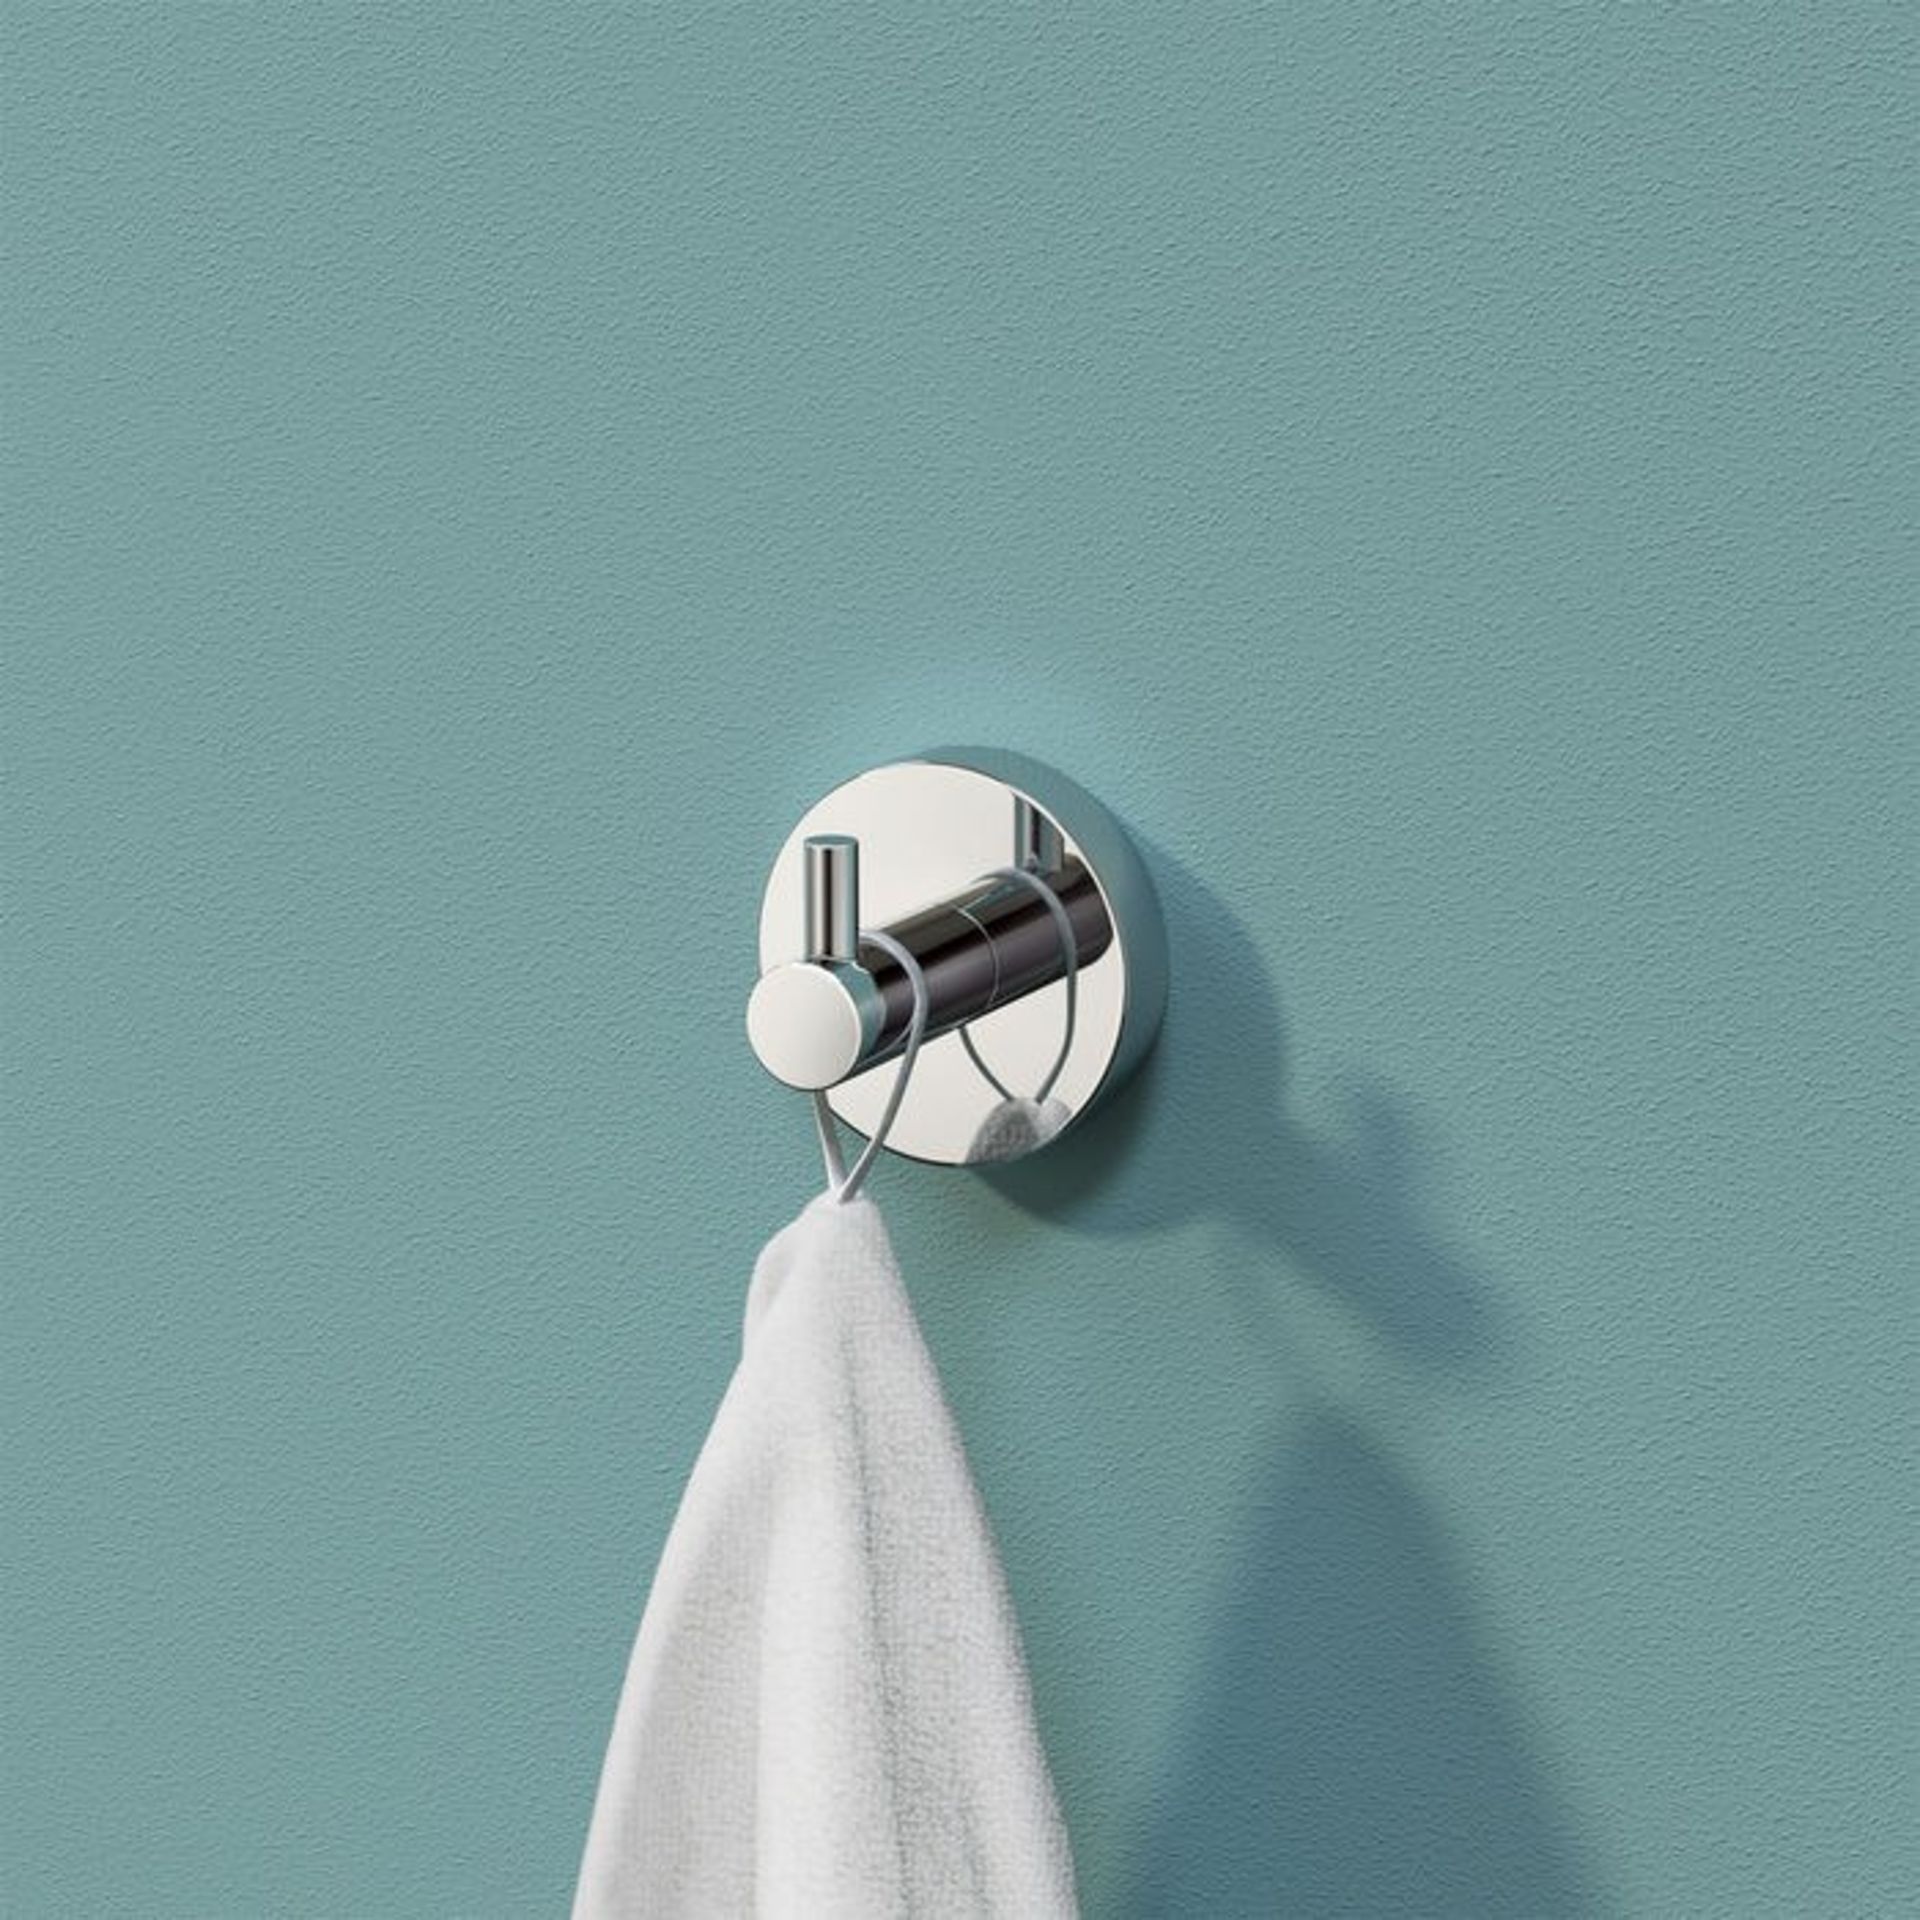 (QT1000) Finsbury Robe Hook. Finishes your bathroom with a little extra functionality and style...